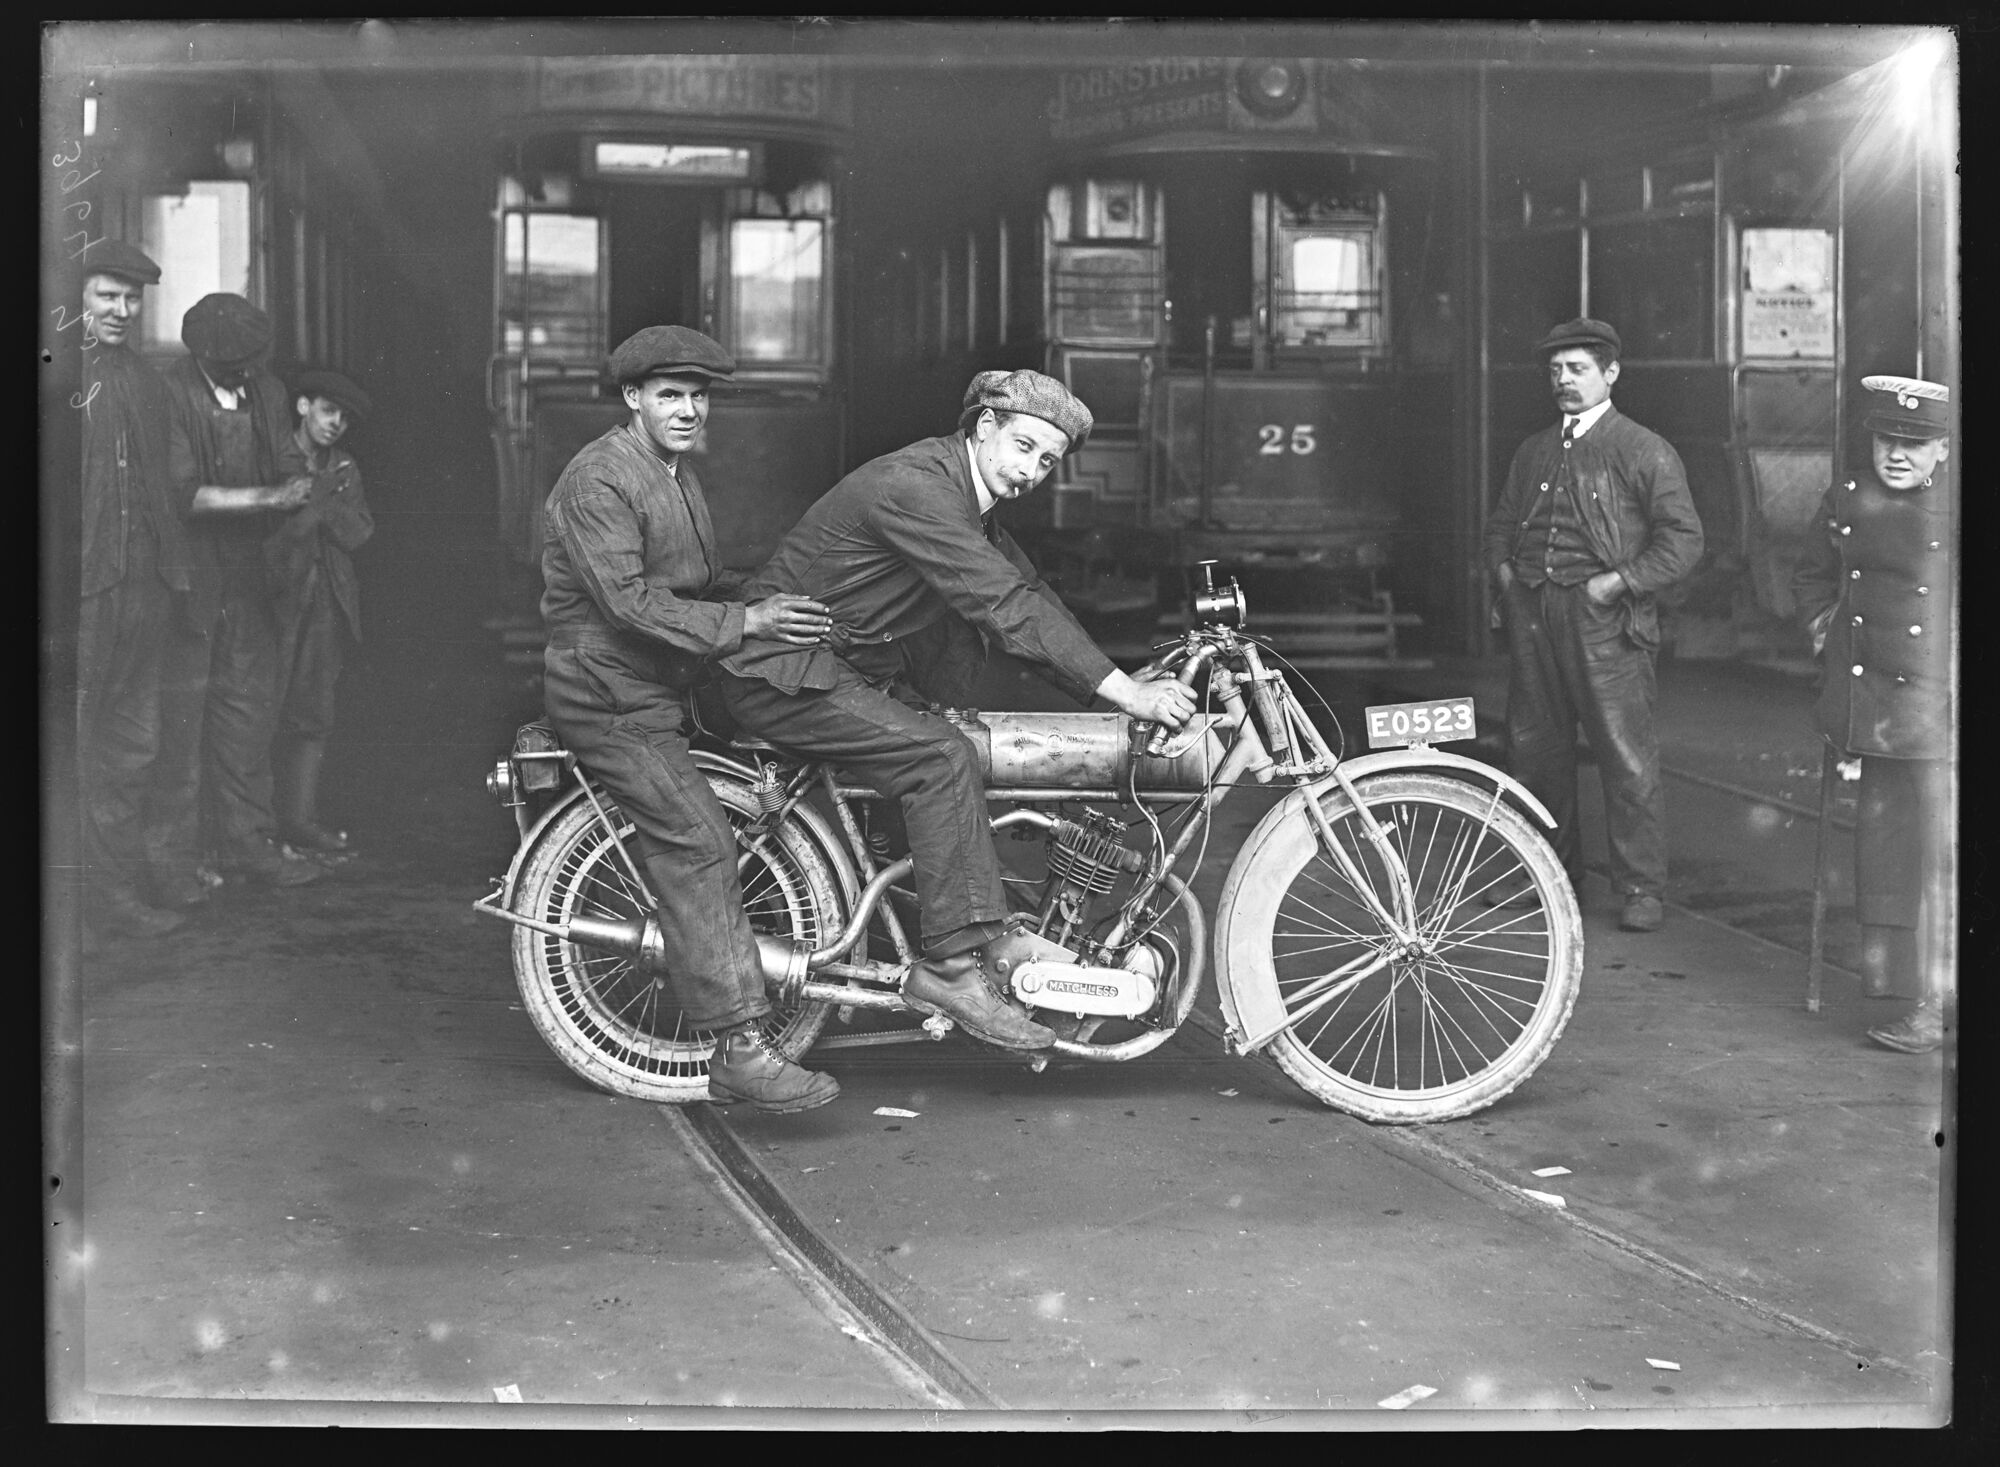 Matchless motorcycle, EO 523, at the Electric Tram Depot, Barrow-in-Furness